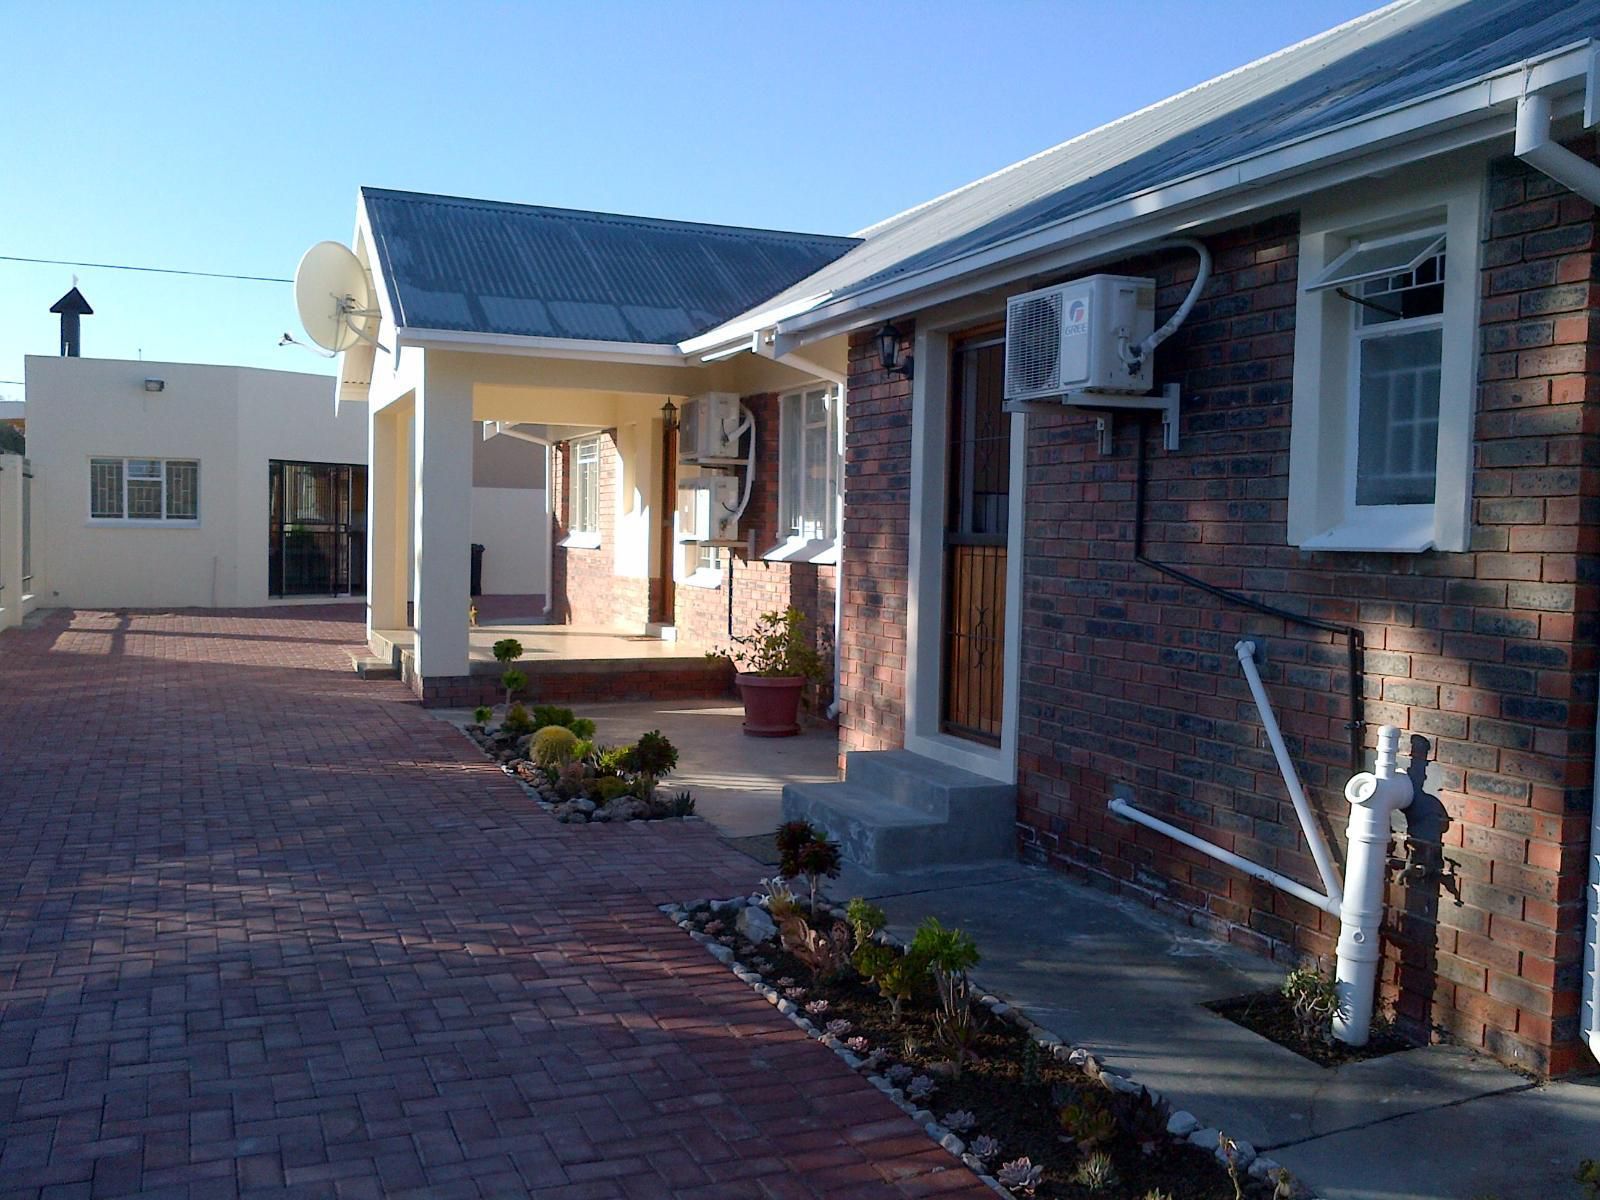 Laings Lodge Laingsburg Western Cape South Africa House, Building, Architecture